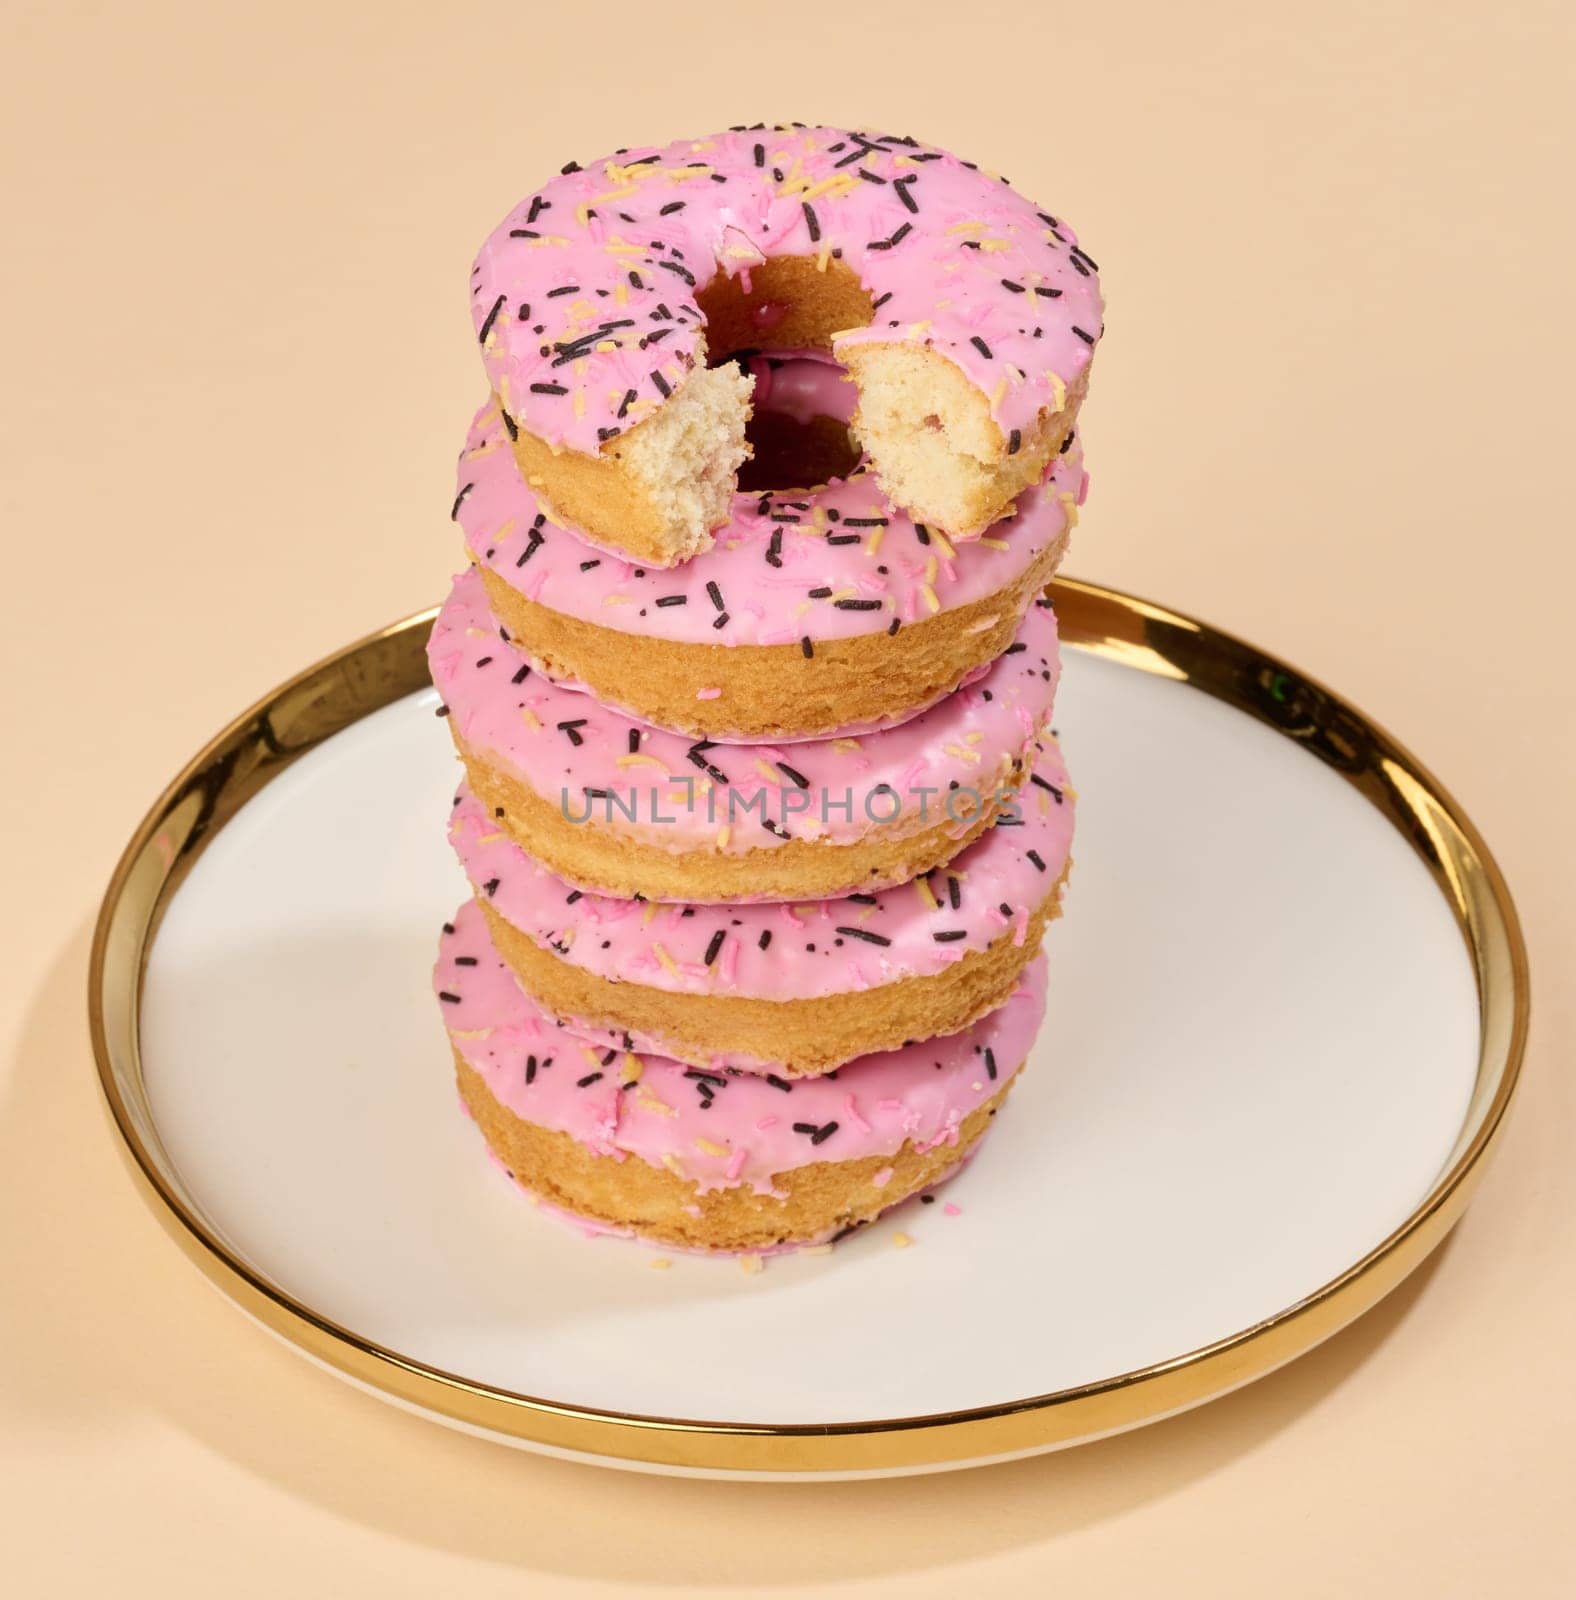 Donut covered with pink glaze and sprinkled with colorful sprinkles on a round plate, brown background by ndanko